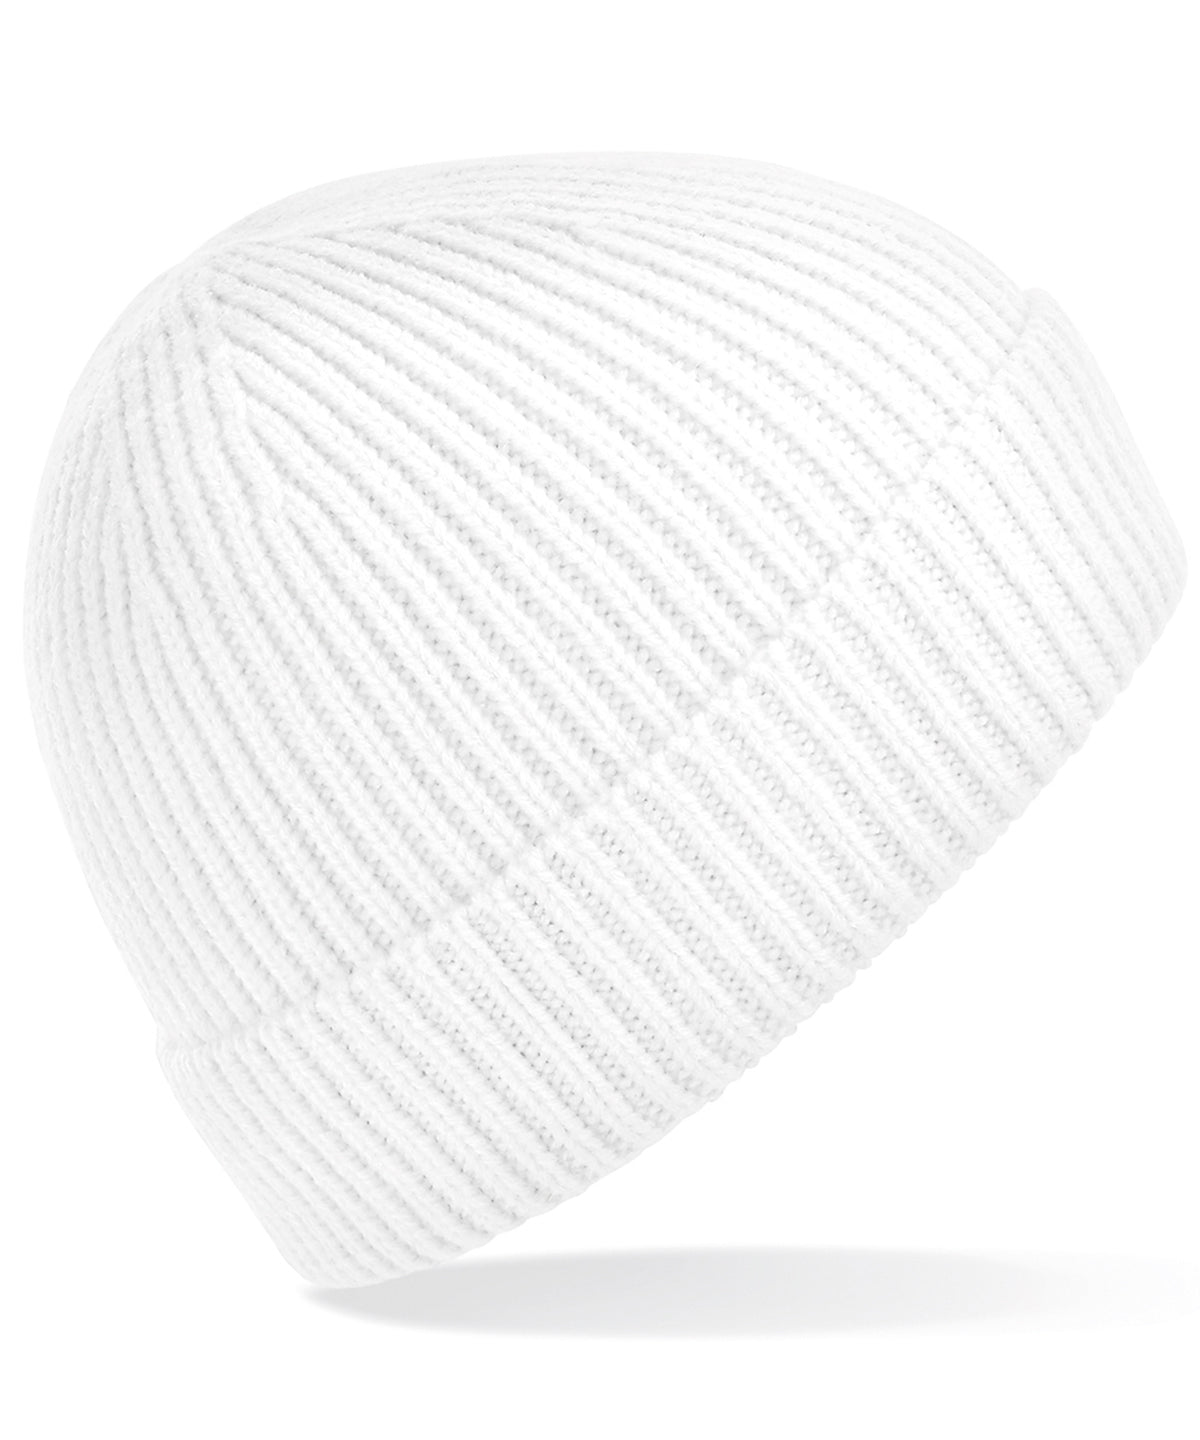 Personalised Hats - White Beechfield Engineered knit ribbed beanie